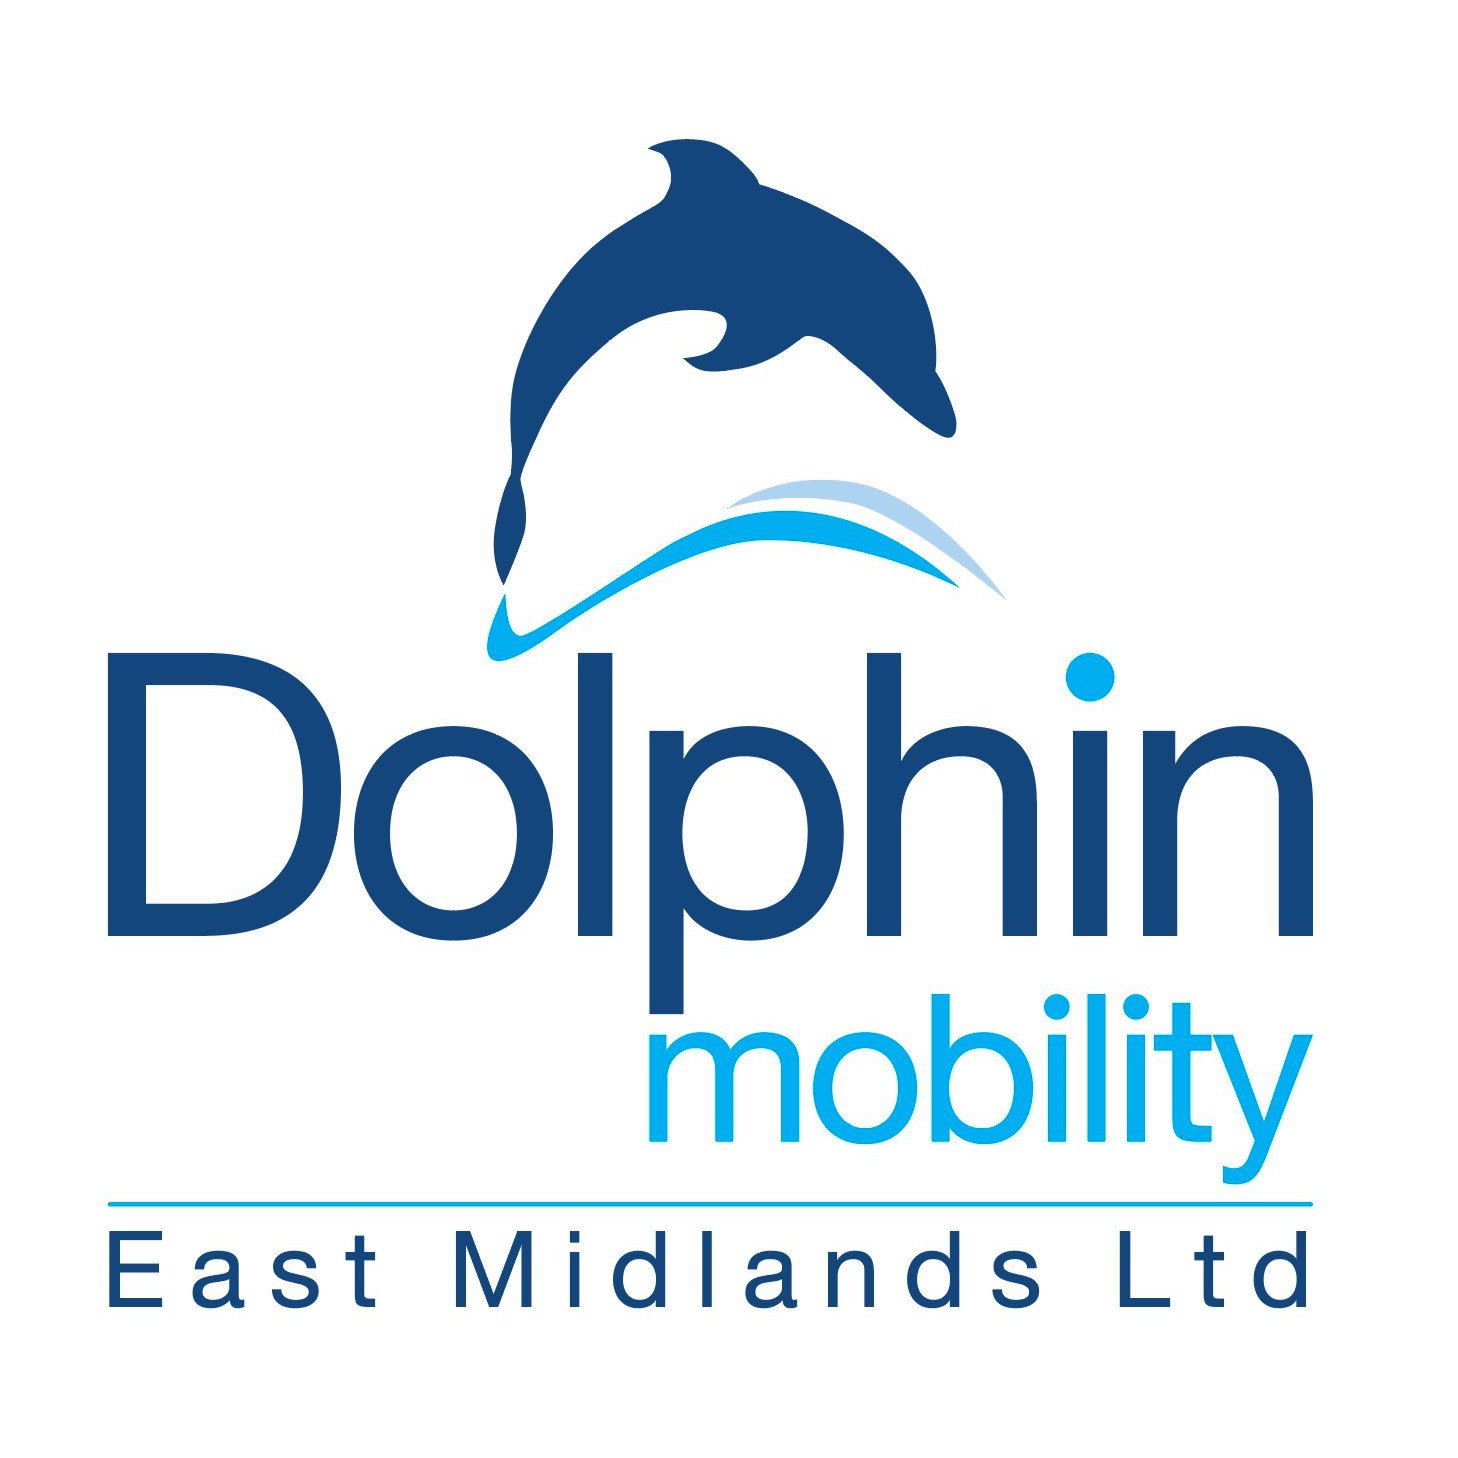 LOGO Dolphin Mobility East Midlands Ltd Lincoln 08000 365744